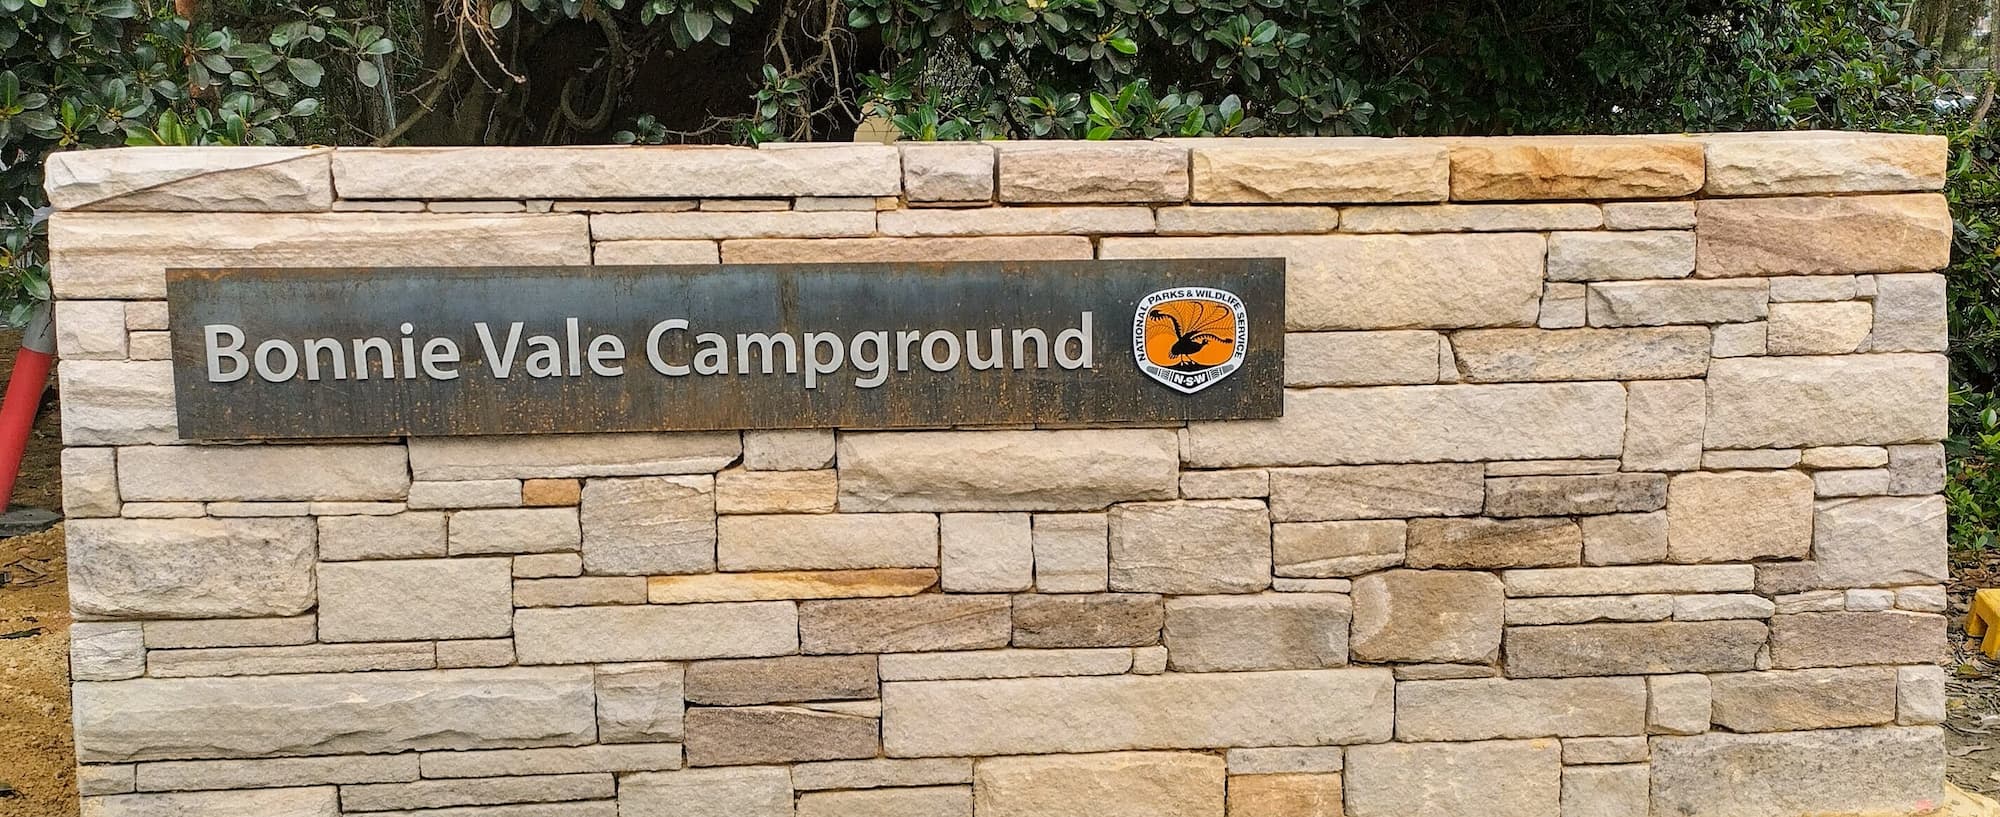 Bonnie Vale Campground Entrance Sign